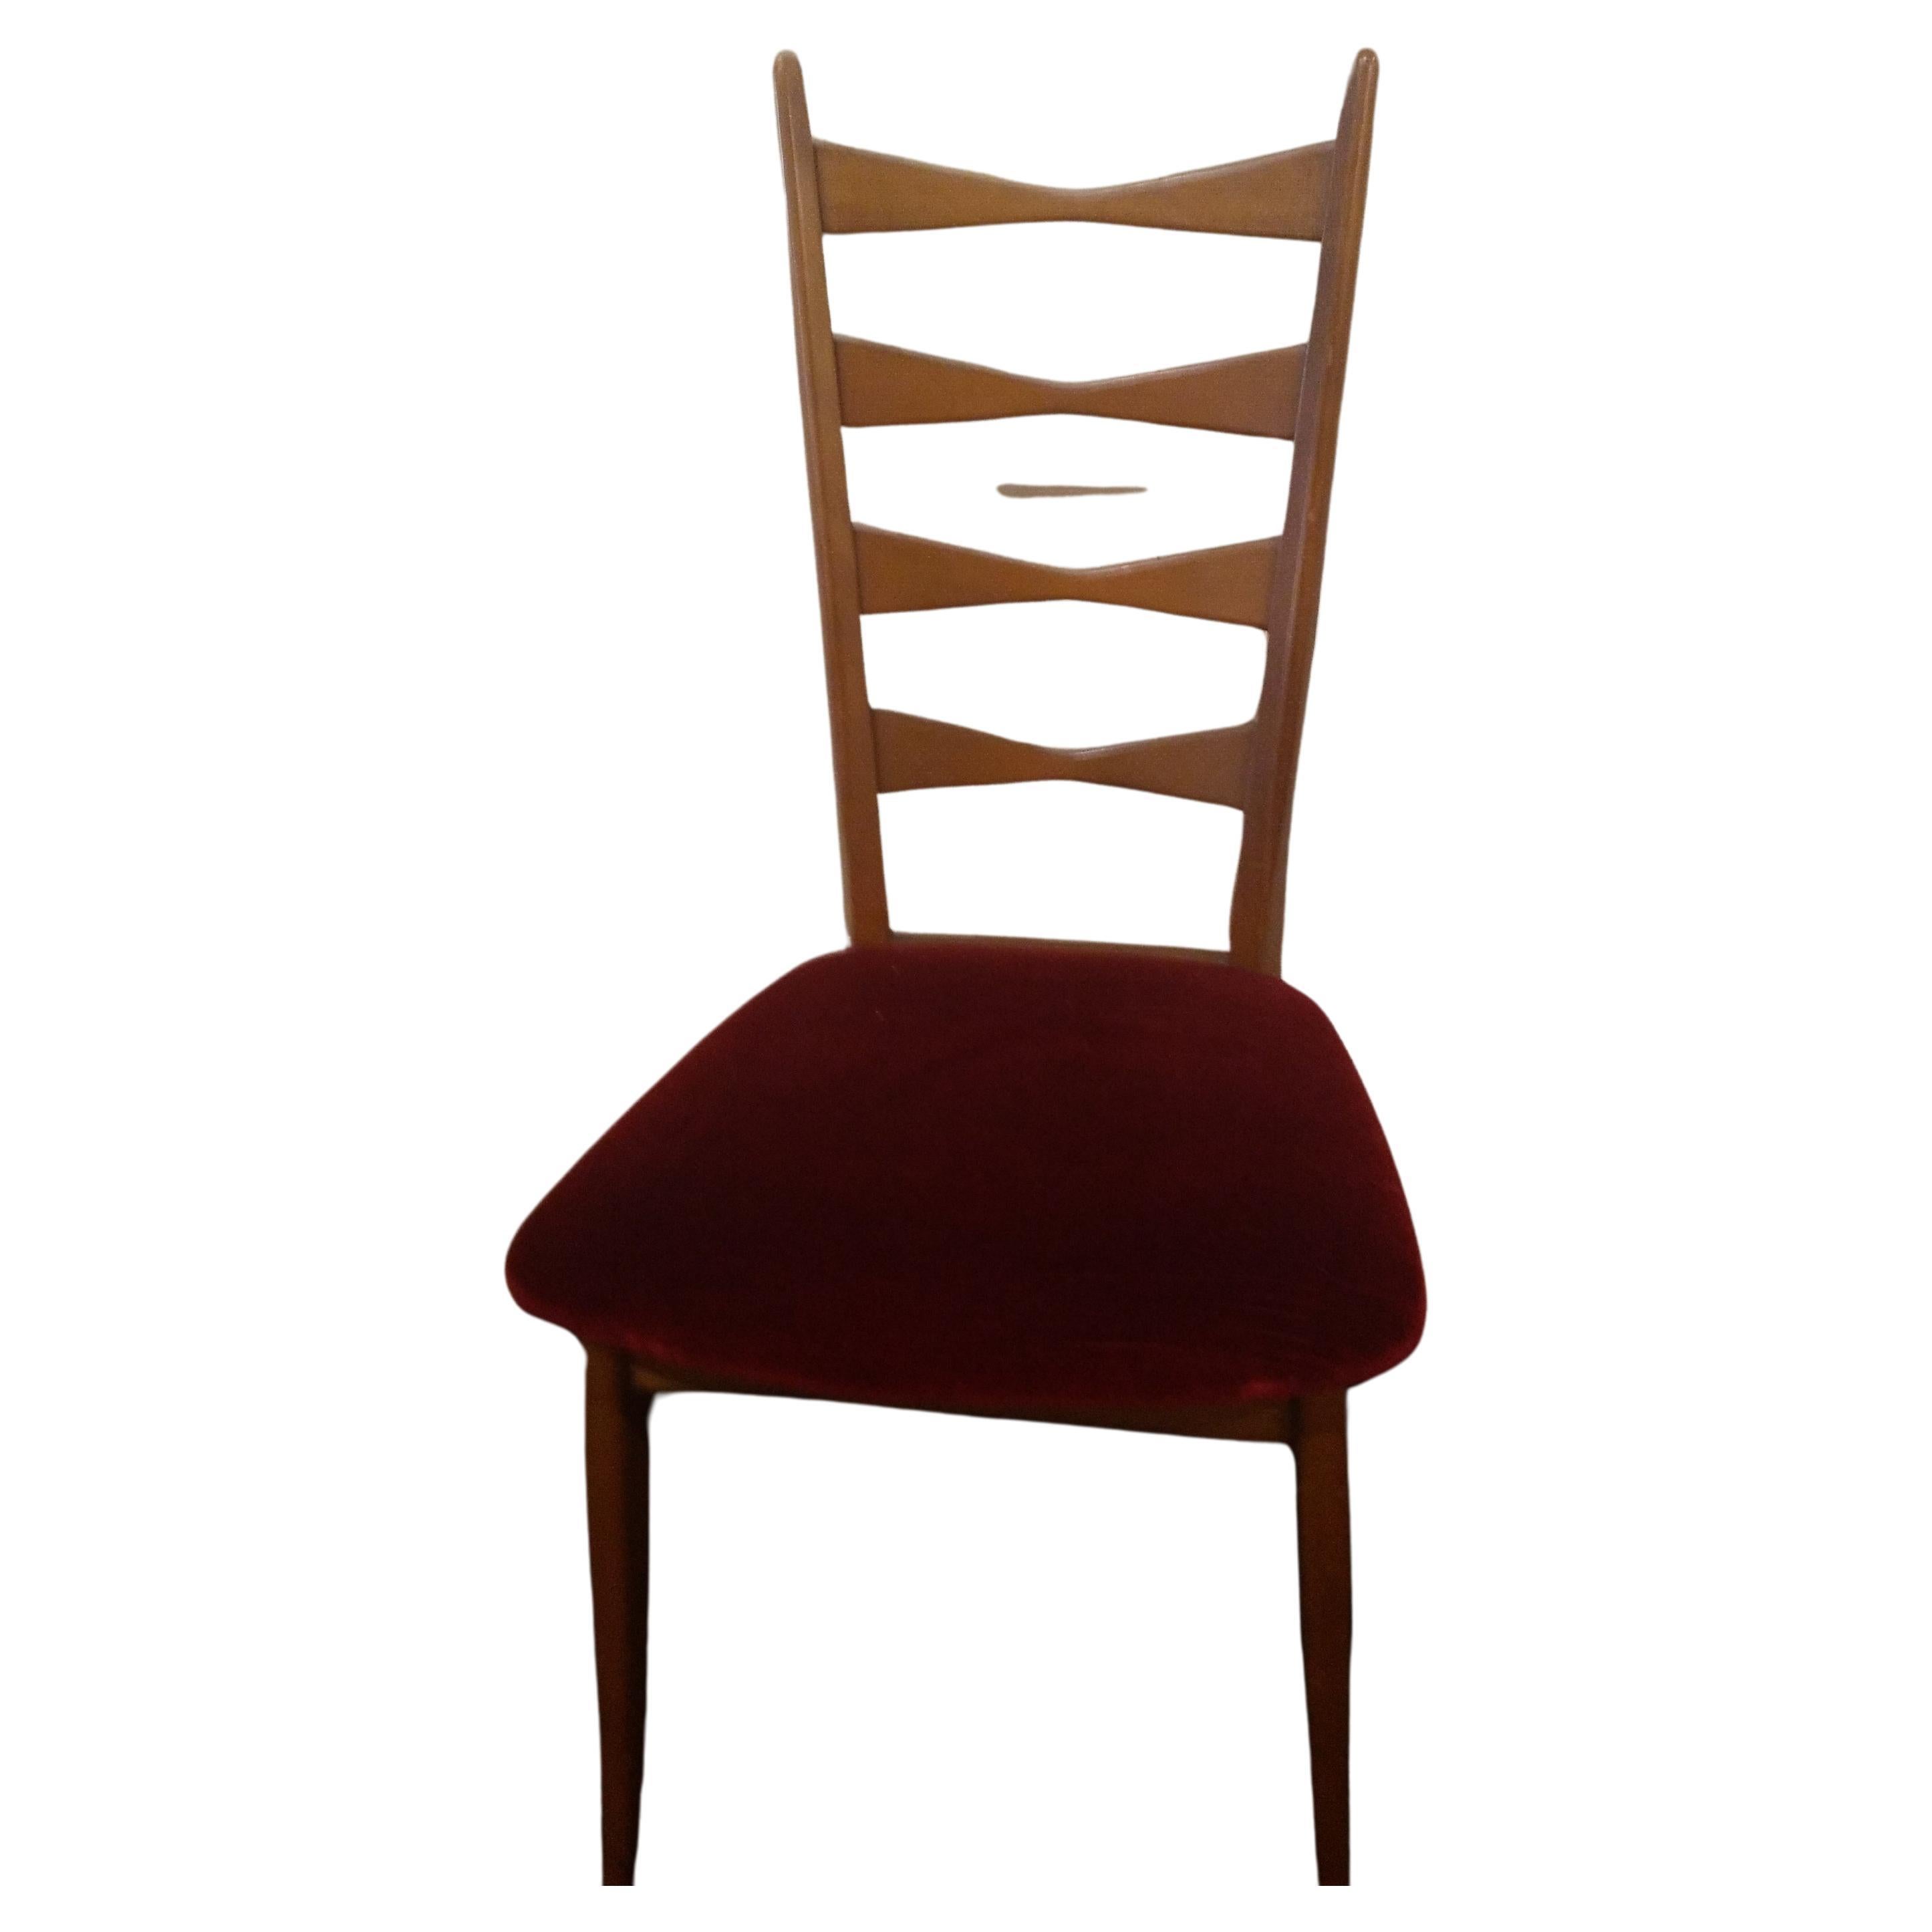 4 Mid-century modern ,Danish chairs ,original in every part, ,have high backs ,are in  light wood , with the original dark red velvet seat . These chairs are elegant and have style.
These chairs have the original production label ,under the seat.
.